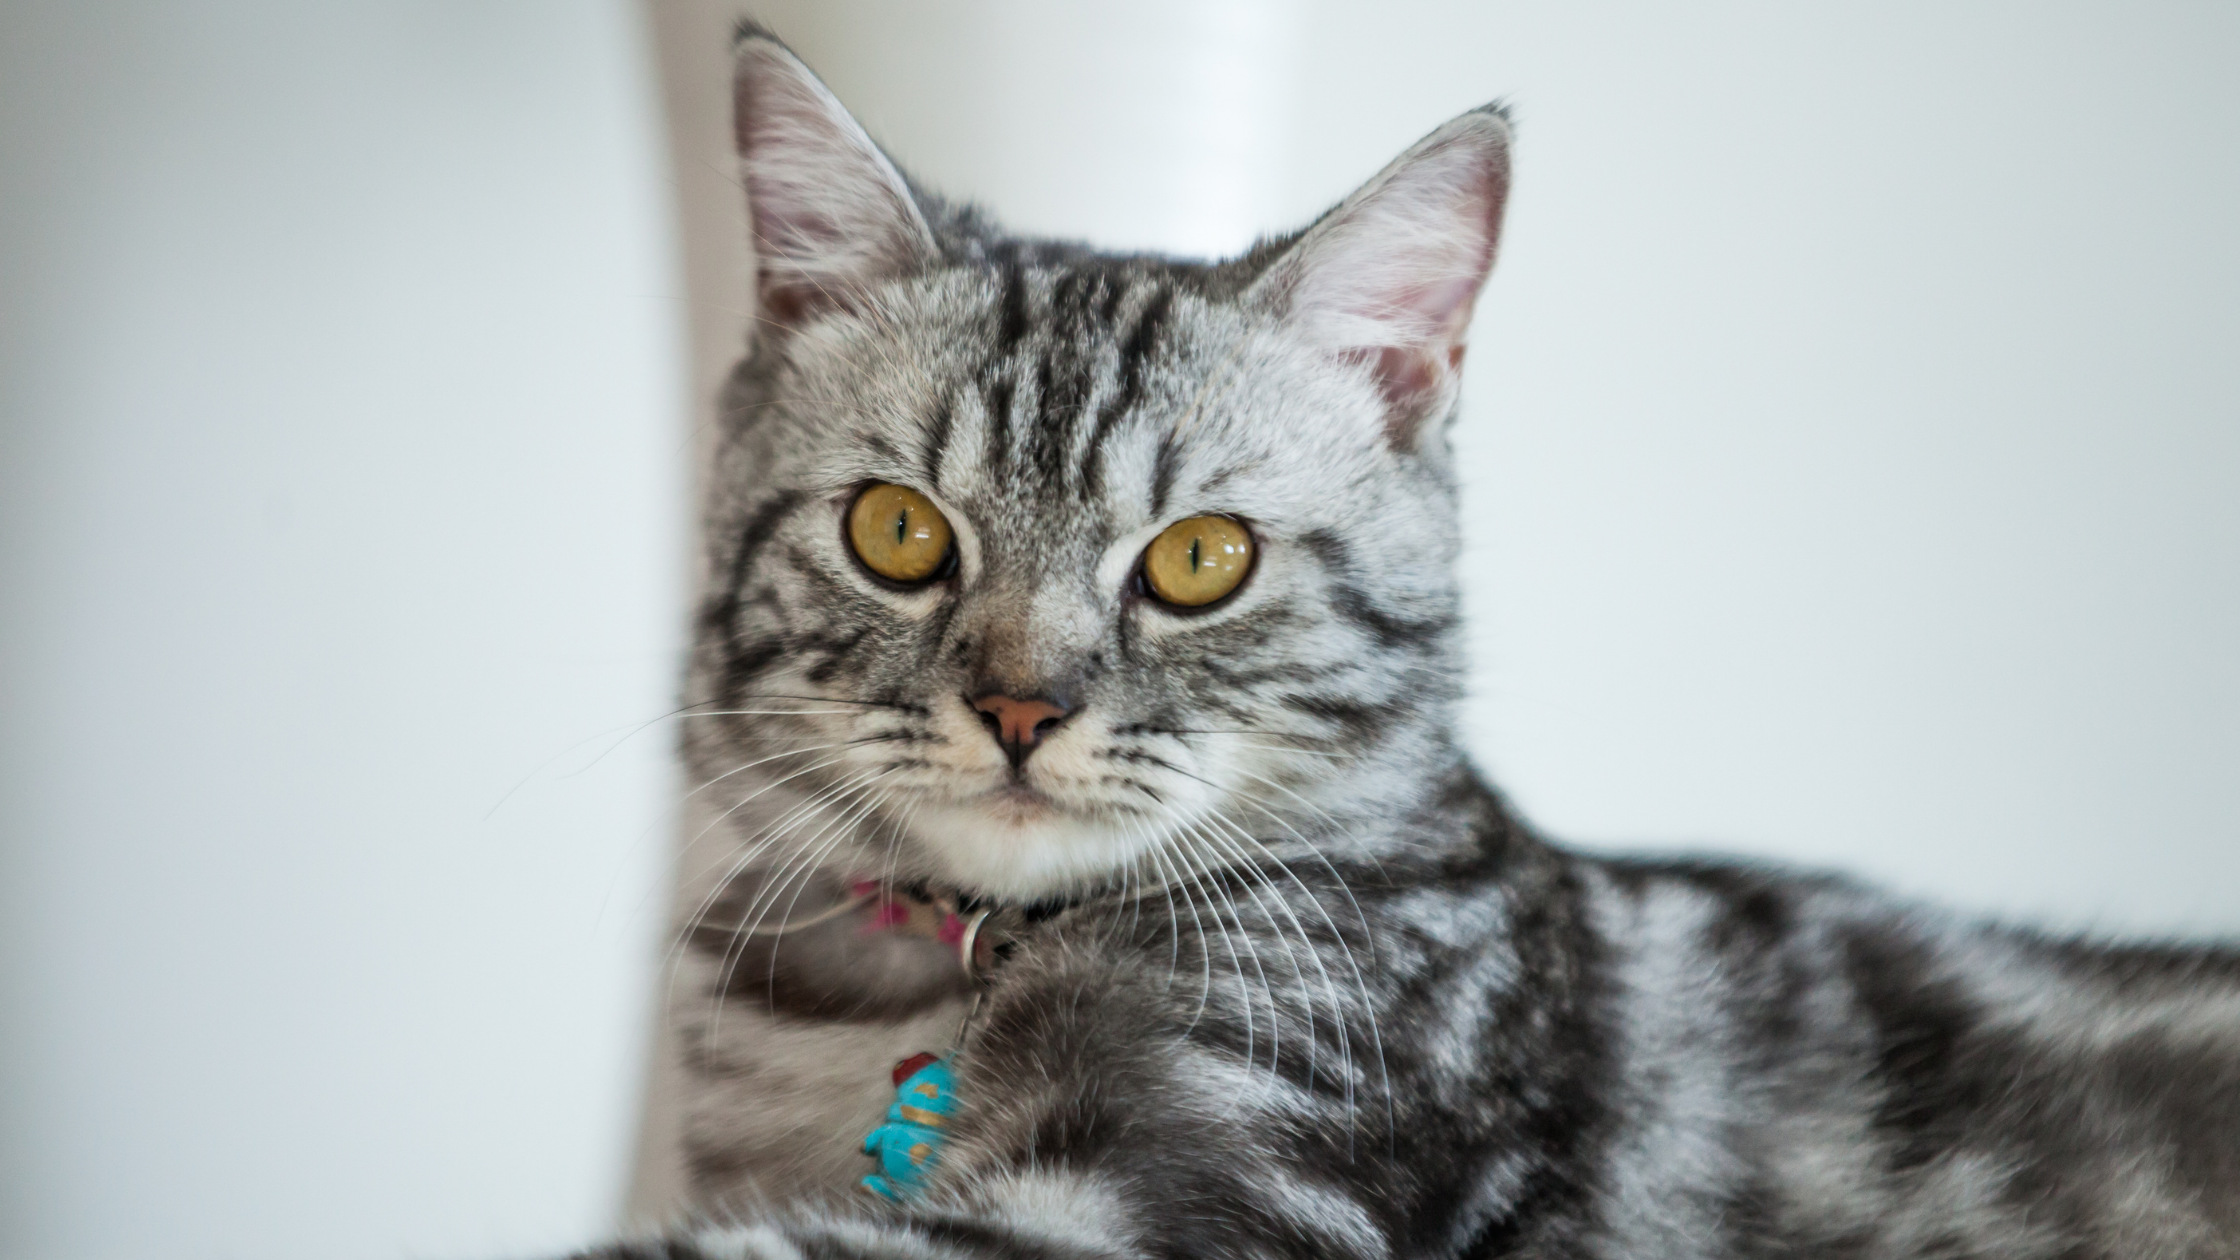 silver tabby cat with blue collar against a wall